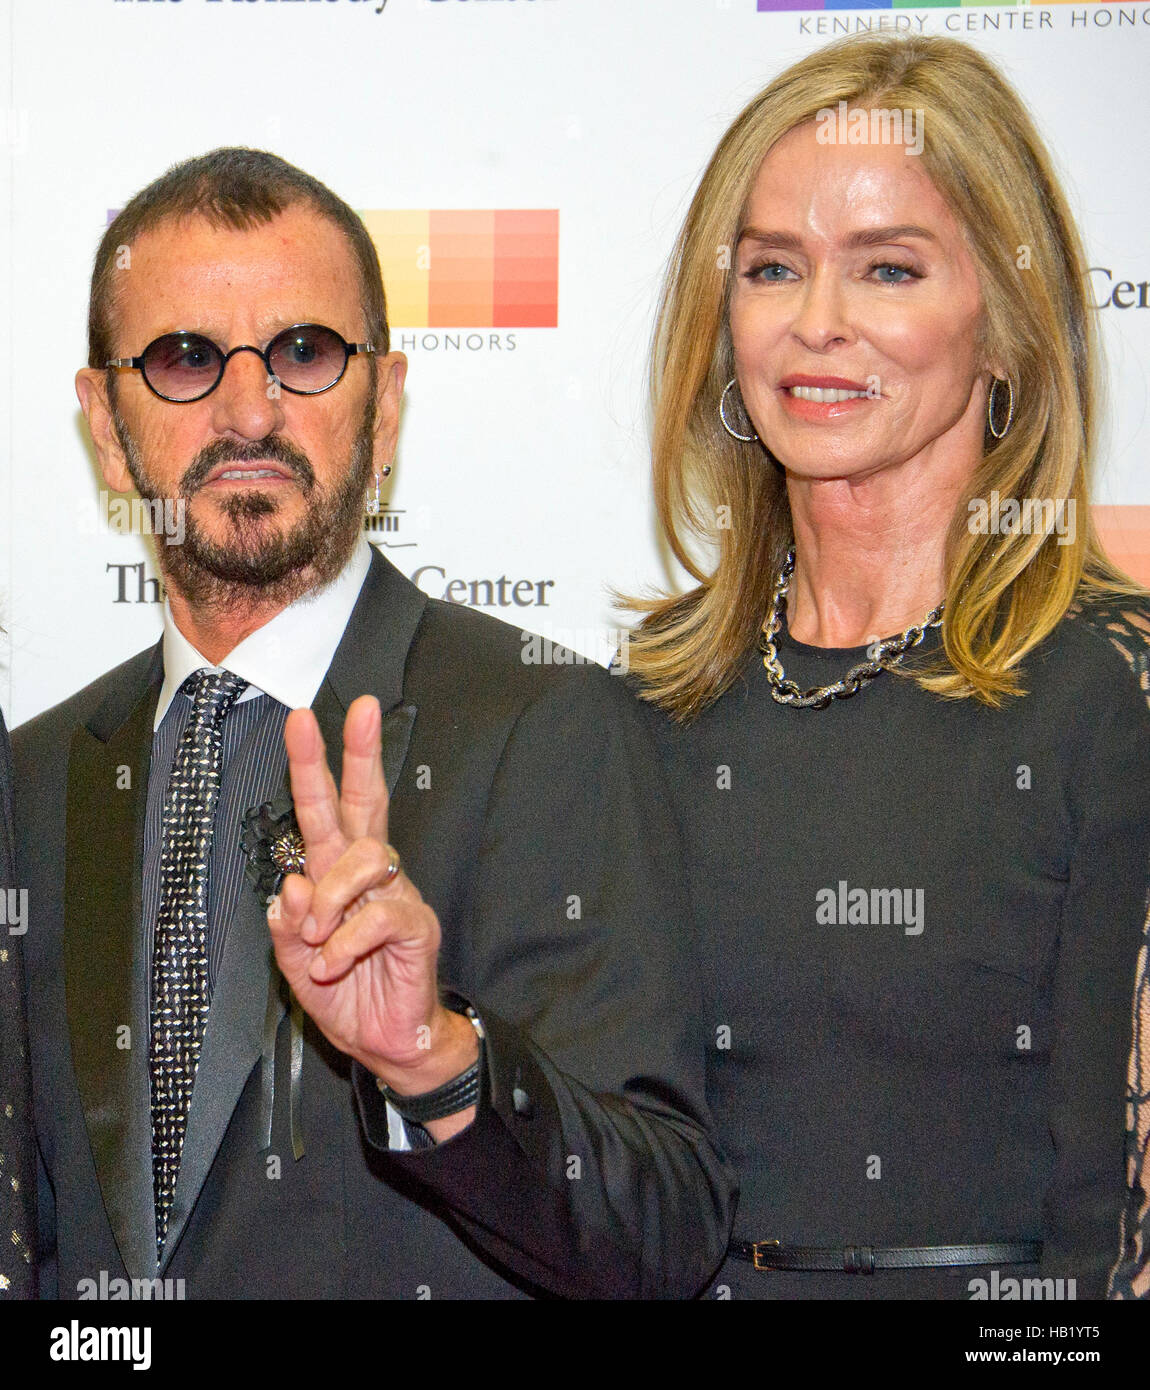 Washington DC, USA. 3rd Dec, 2016. Ringo Starr and Barbara Bach arrive for the formal Artist's Dinner honoring the recipients of the 39th Annual Kennedy Center Honors hosted by United States Secretary of State John F. Kerry at the U.S. Department of State in Washington, DC on Saturday, December 3, 2016. The 2016 honorees are: Argentine pianist Martha Argerich; rock band the Eagles; screen and stage actor Al Pacino; gospel and blues singer Mavis Staples; and musician James Taylor. Credit:  MediaPunch Inc/Alamy Live News Stock Photo